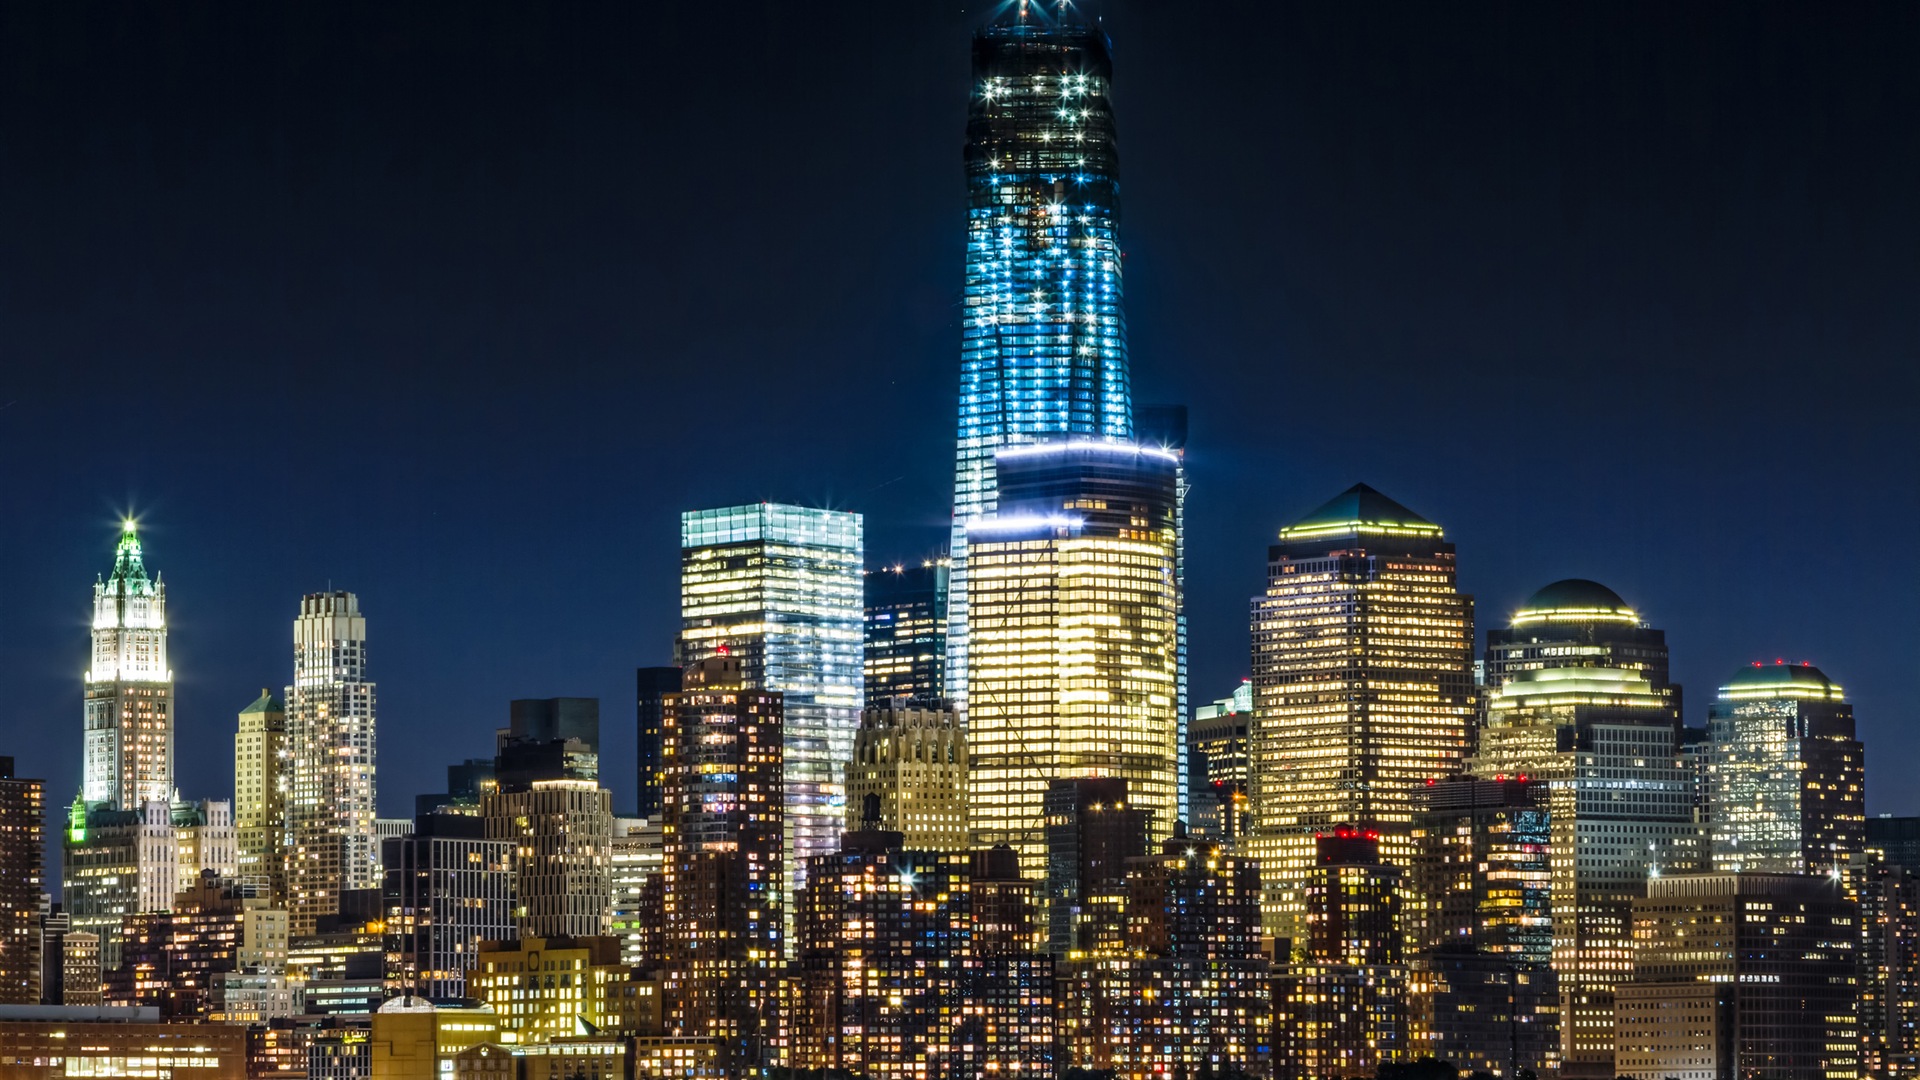 Empire State Building in New York, city night HD wallpapers #17 - 1920x1080